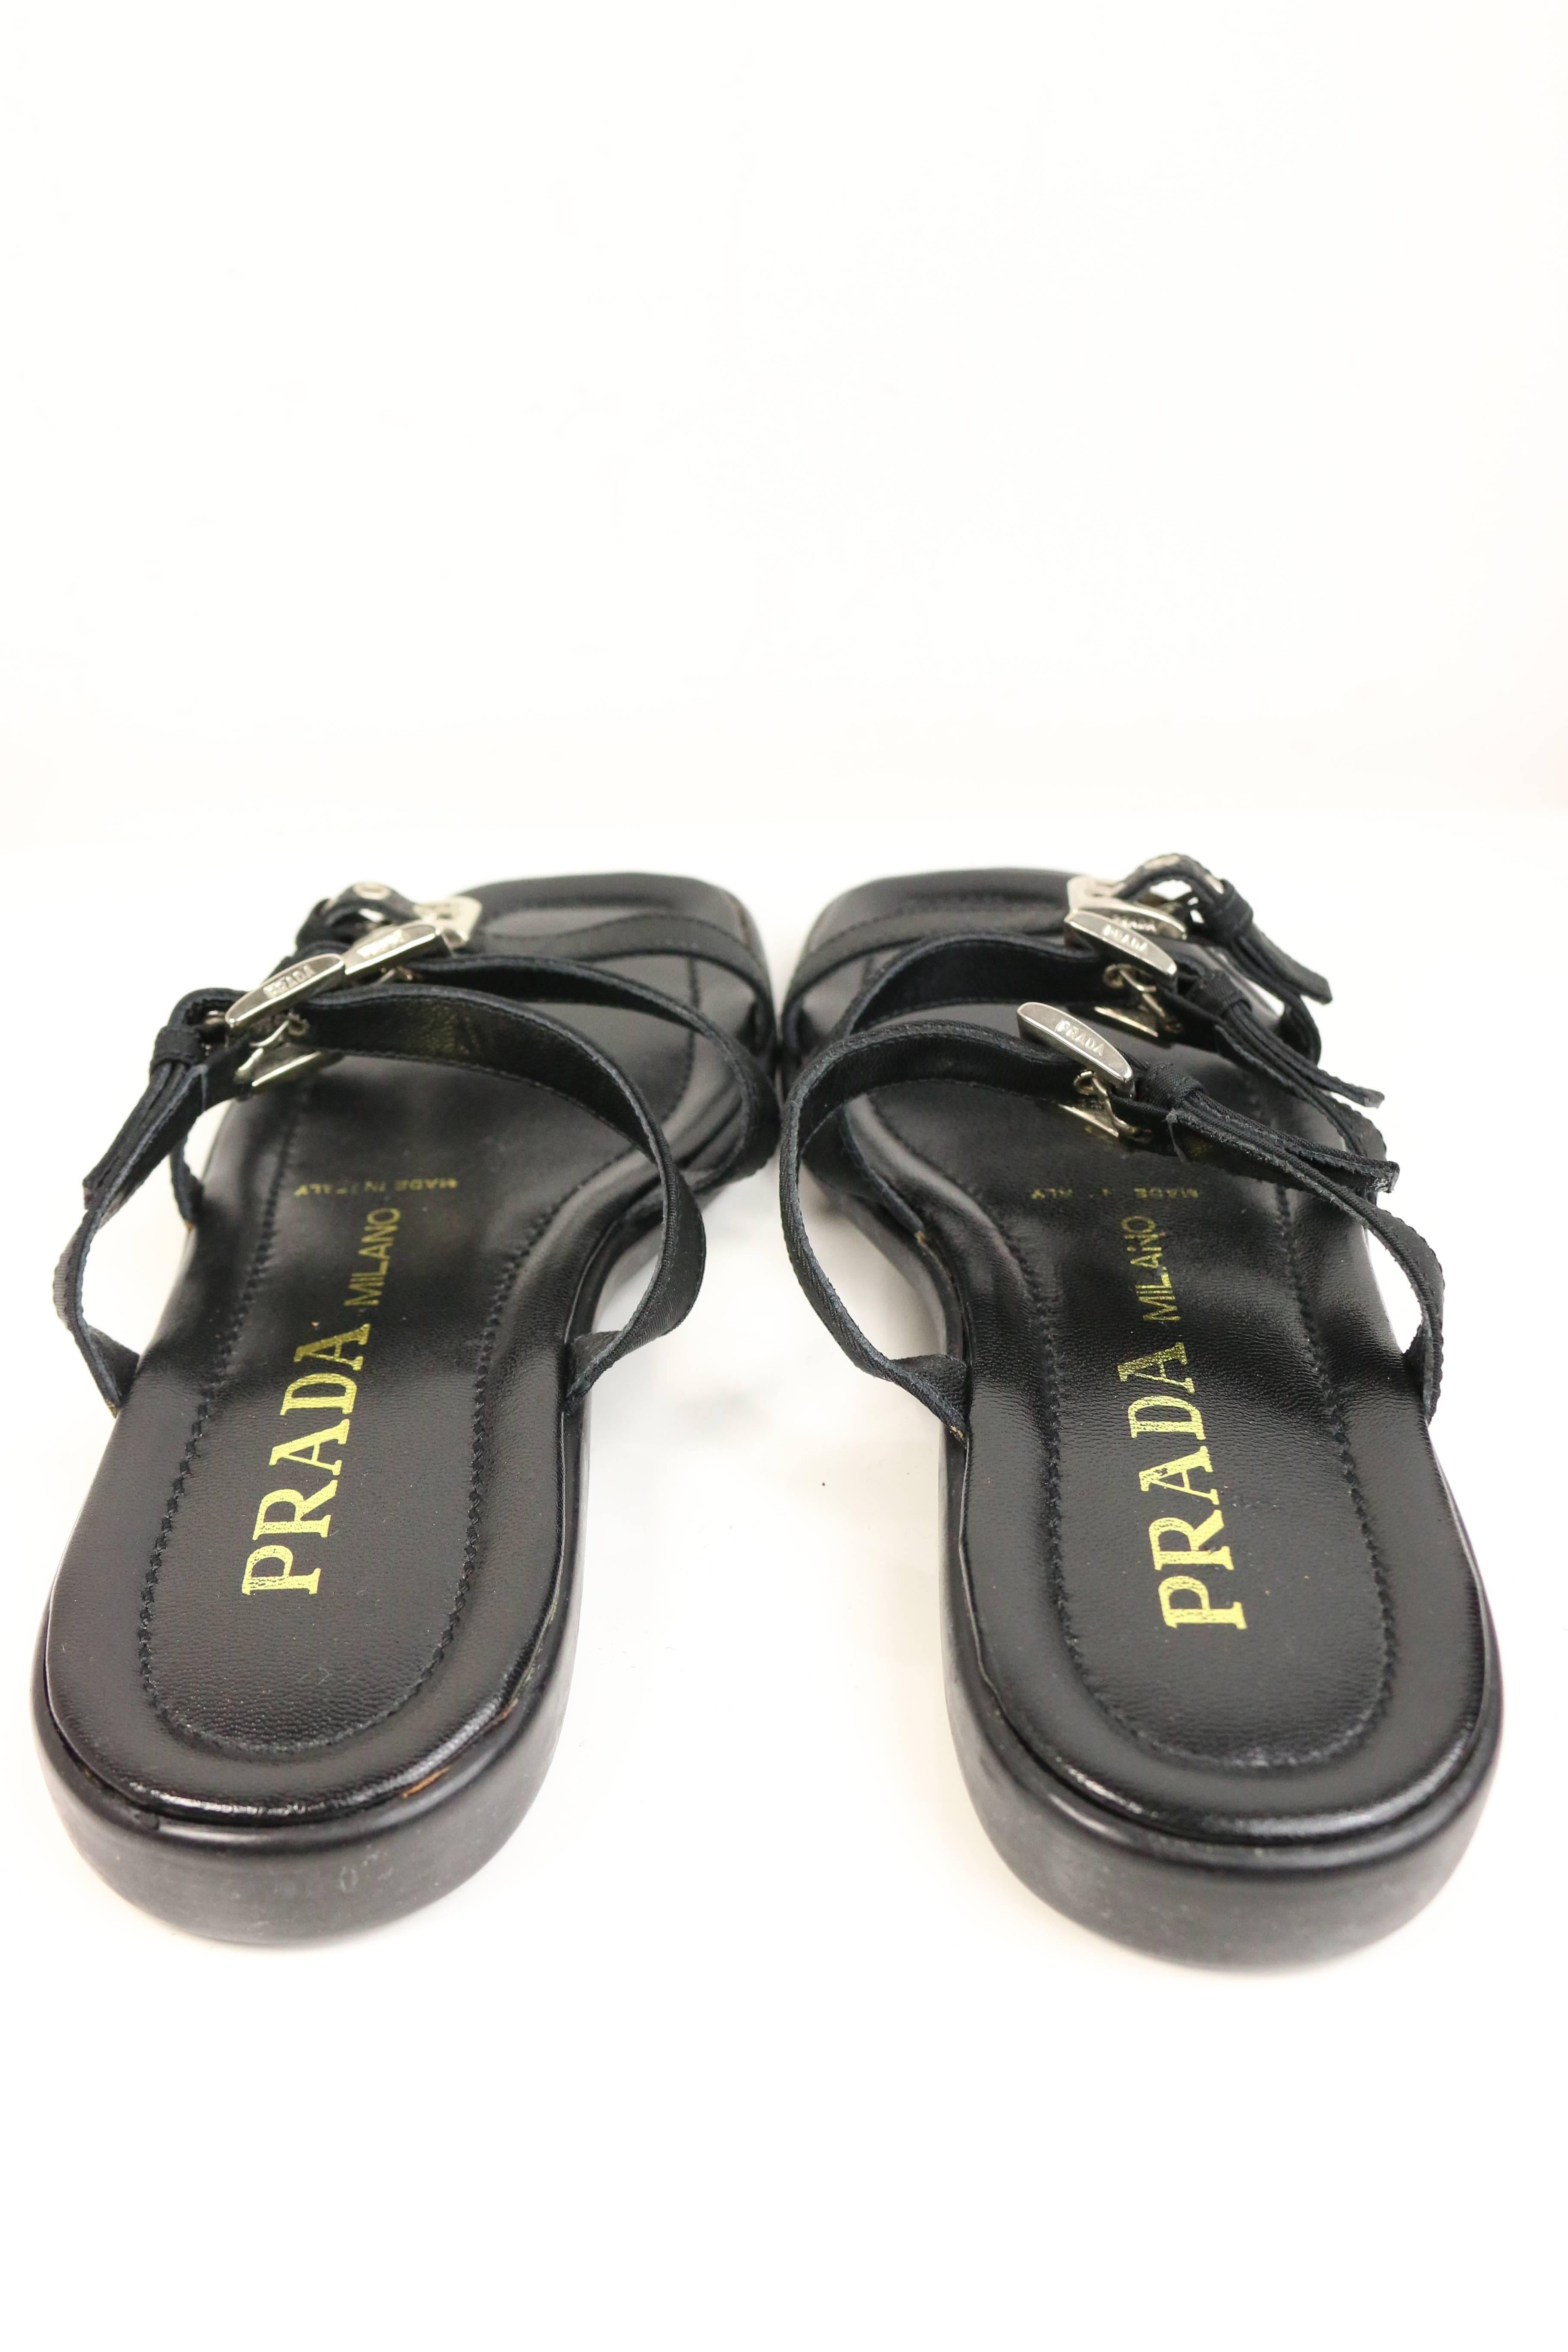 - Vintage 90s Prada black leather slip on sandals. Featuring three black nylon straps with sliver adjustable buckles.

- Made in Italy. 

- Size 38.  

- Please note this vintage item is not new, so it might have minor imperfections.
